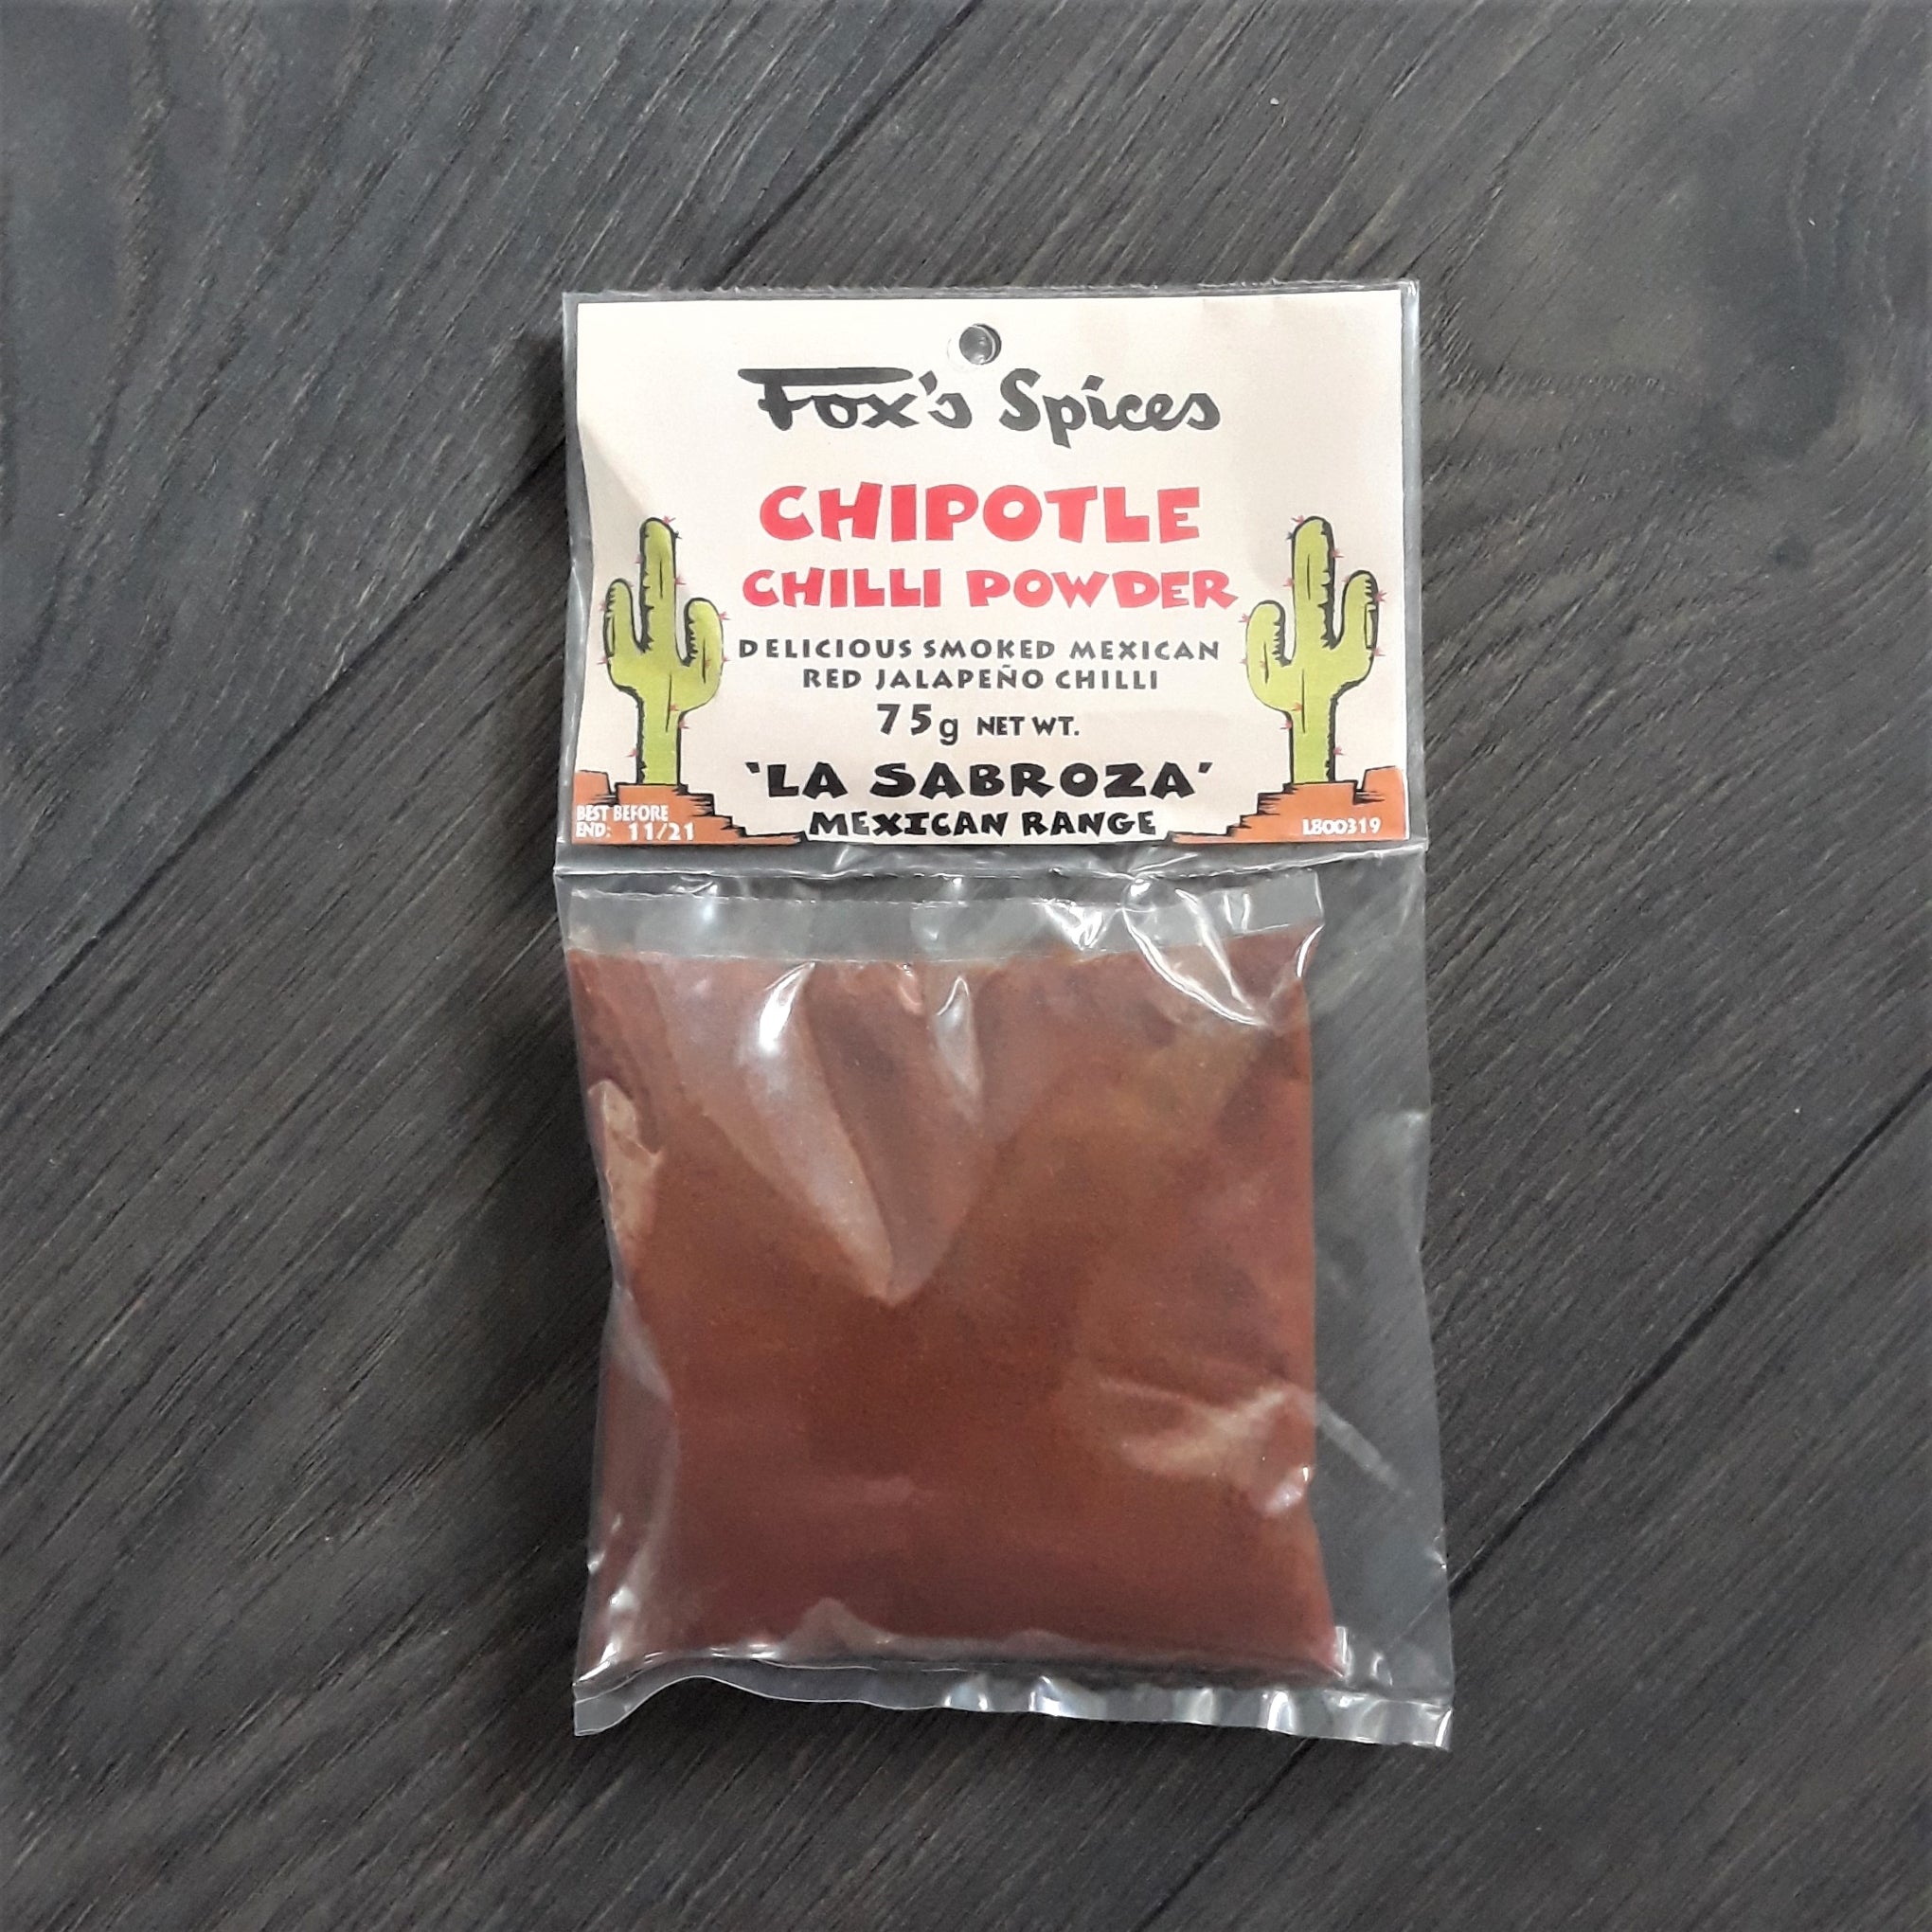 A 75g bag of Chipotle Chilli Powder from Fox's Spices.